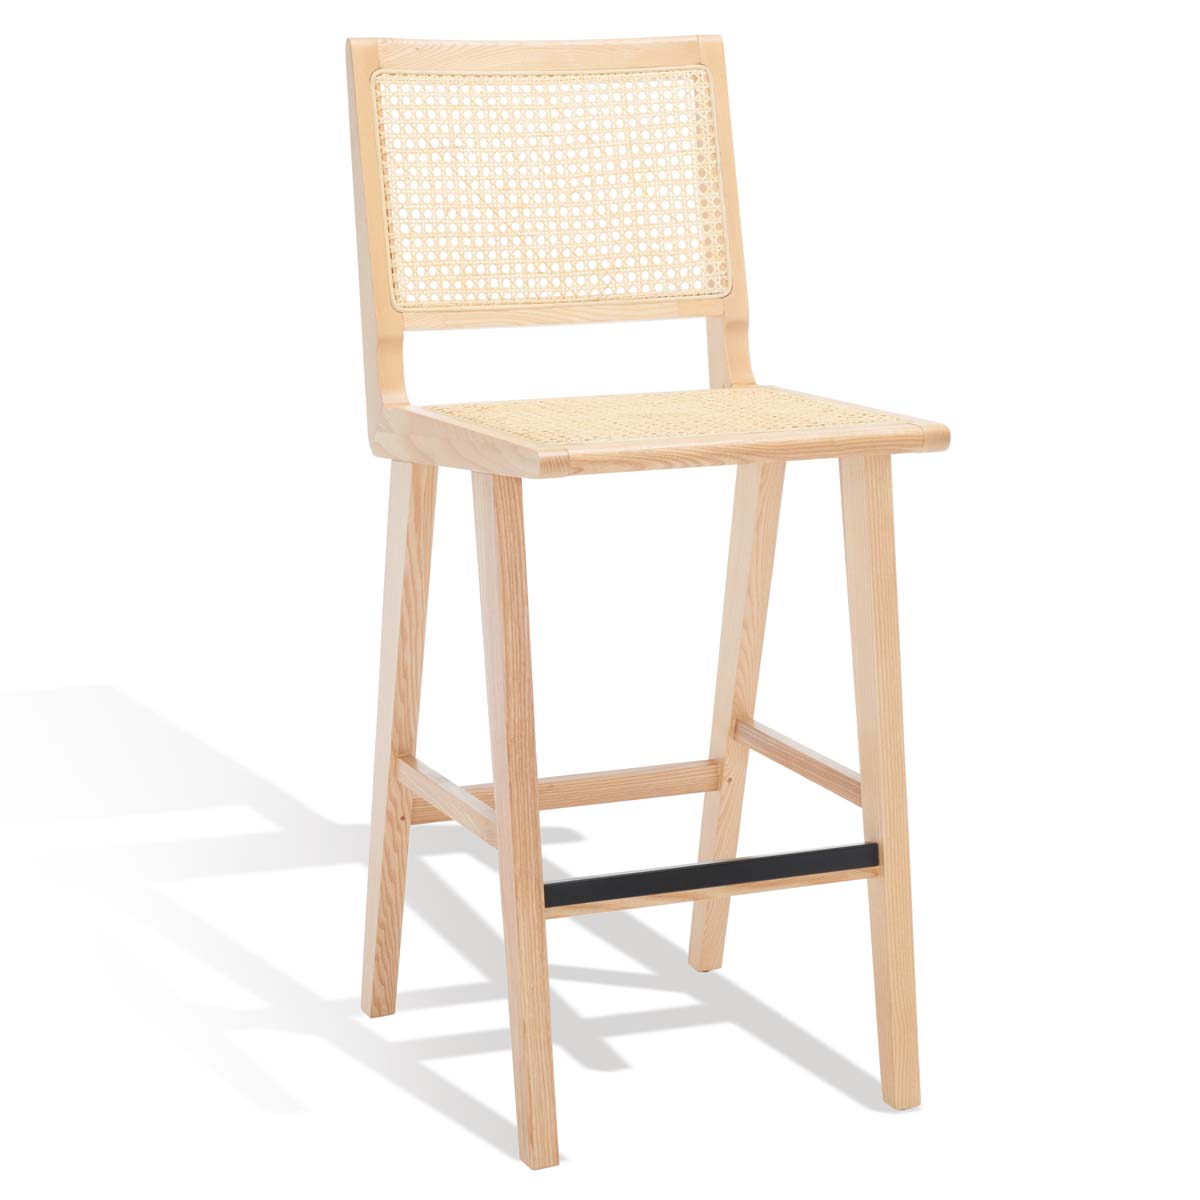 Safavieh Couture Hattie French Cane Barstool - Natural